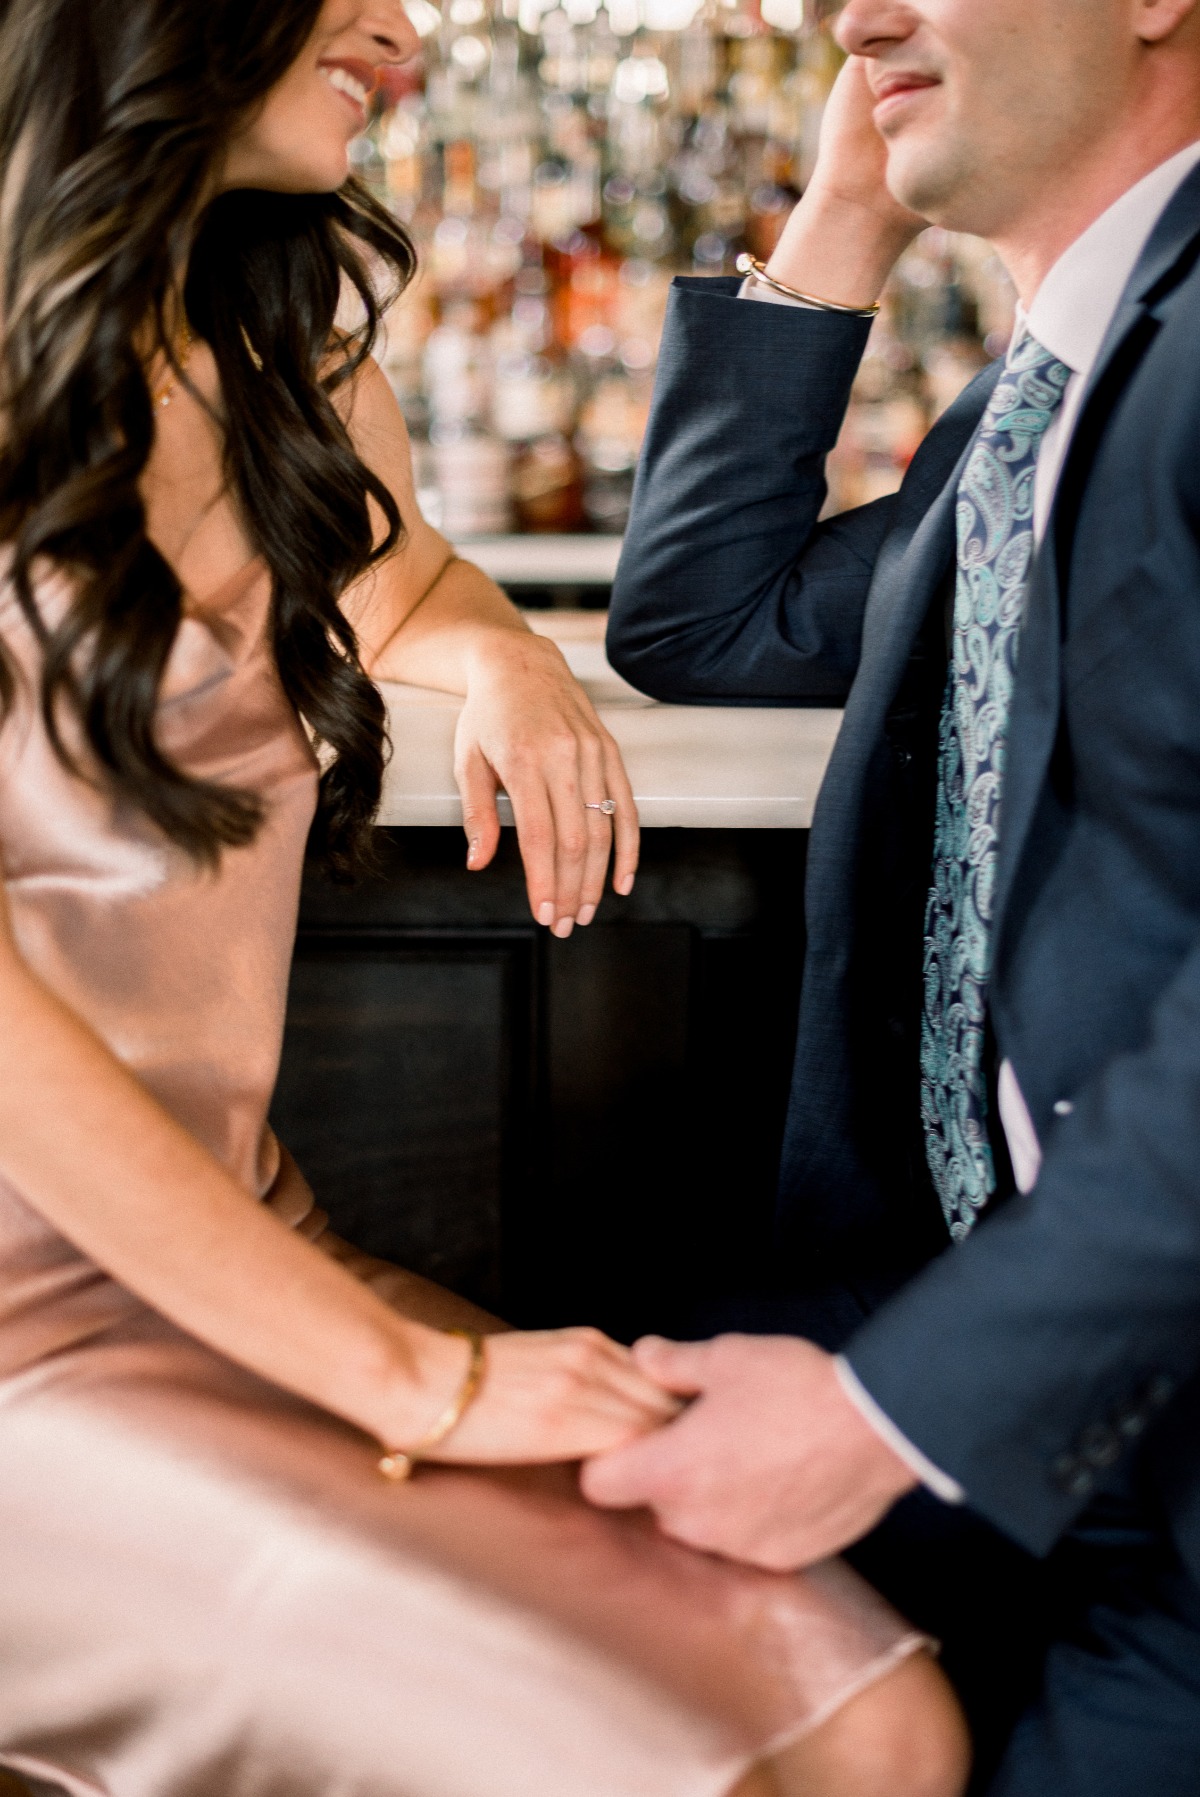 Wish You Were Here: A Chic Engagement Shoot In Denver, Colorado